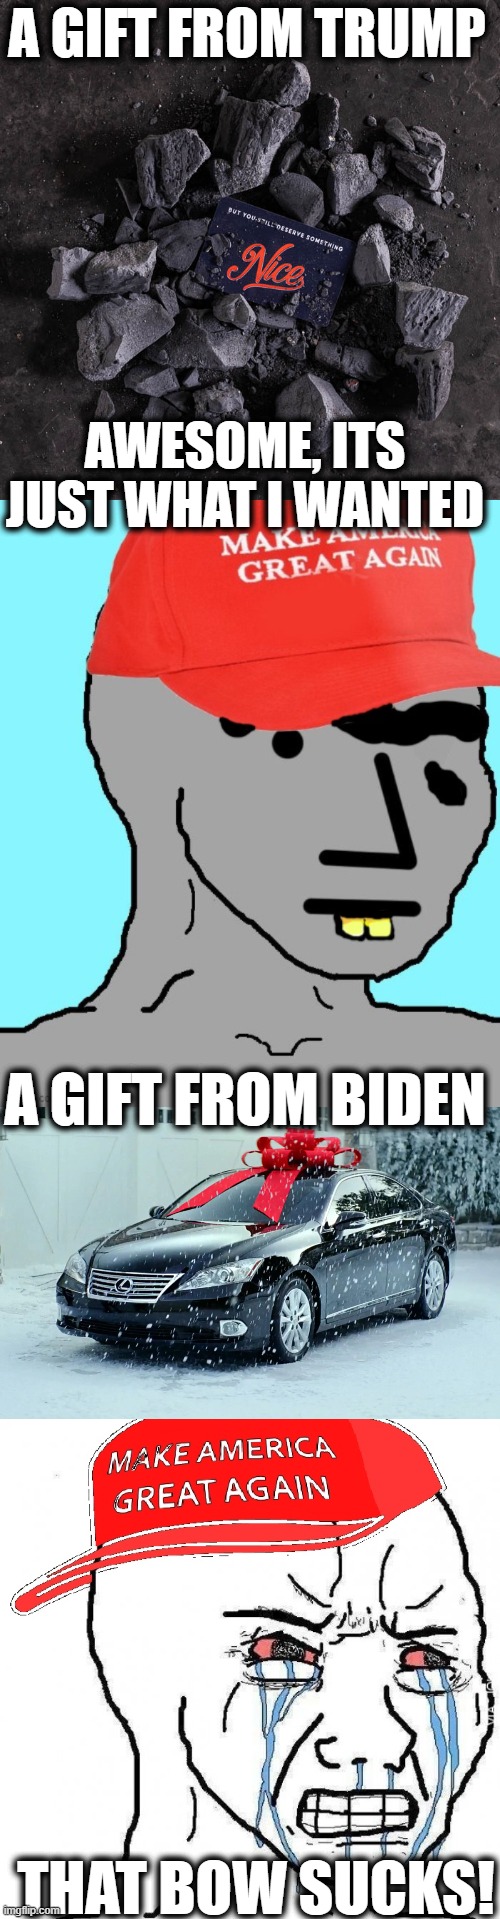 BDS its a real thing | A GIFT FROM TRUMP; AWESOME, ITS JUST WHAT I WANTED; A GIFT FROM BIDEN; THAT BOW SUCKS! | image tagged in maga npc,crying wojak maga,memes,politics,maga,whiners | made w/ Imgflip meme maker